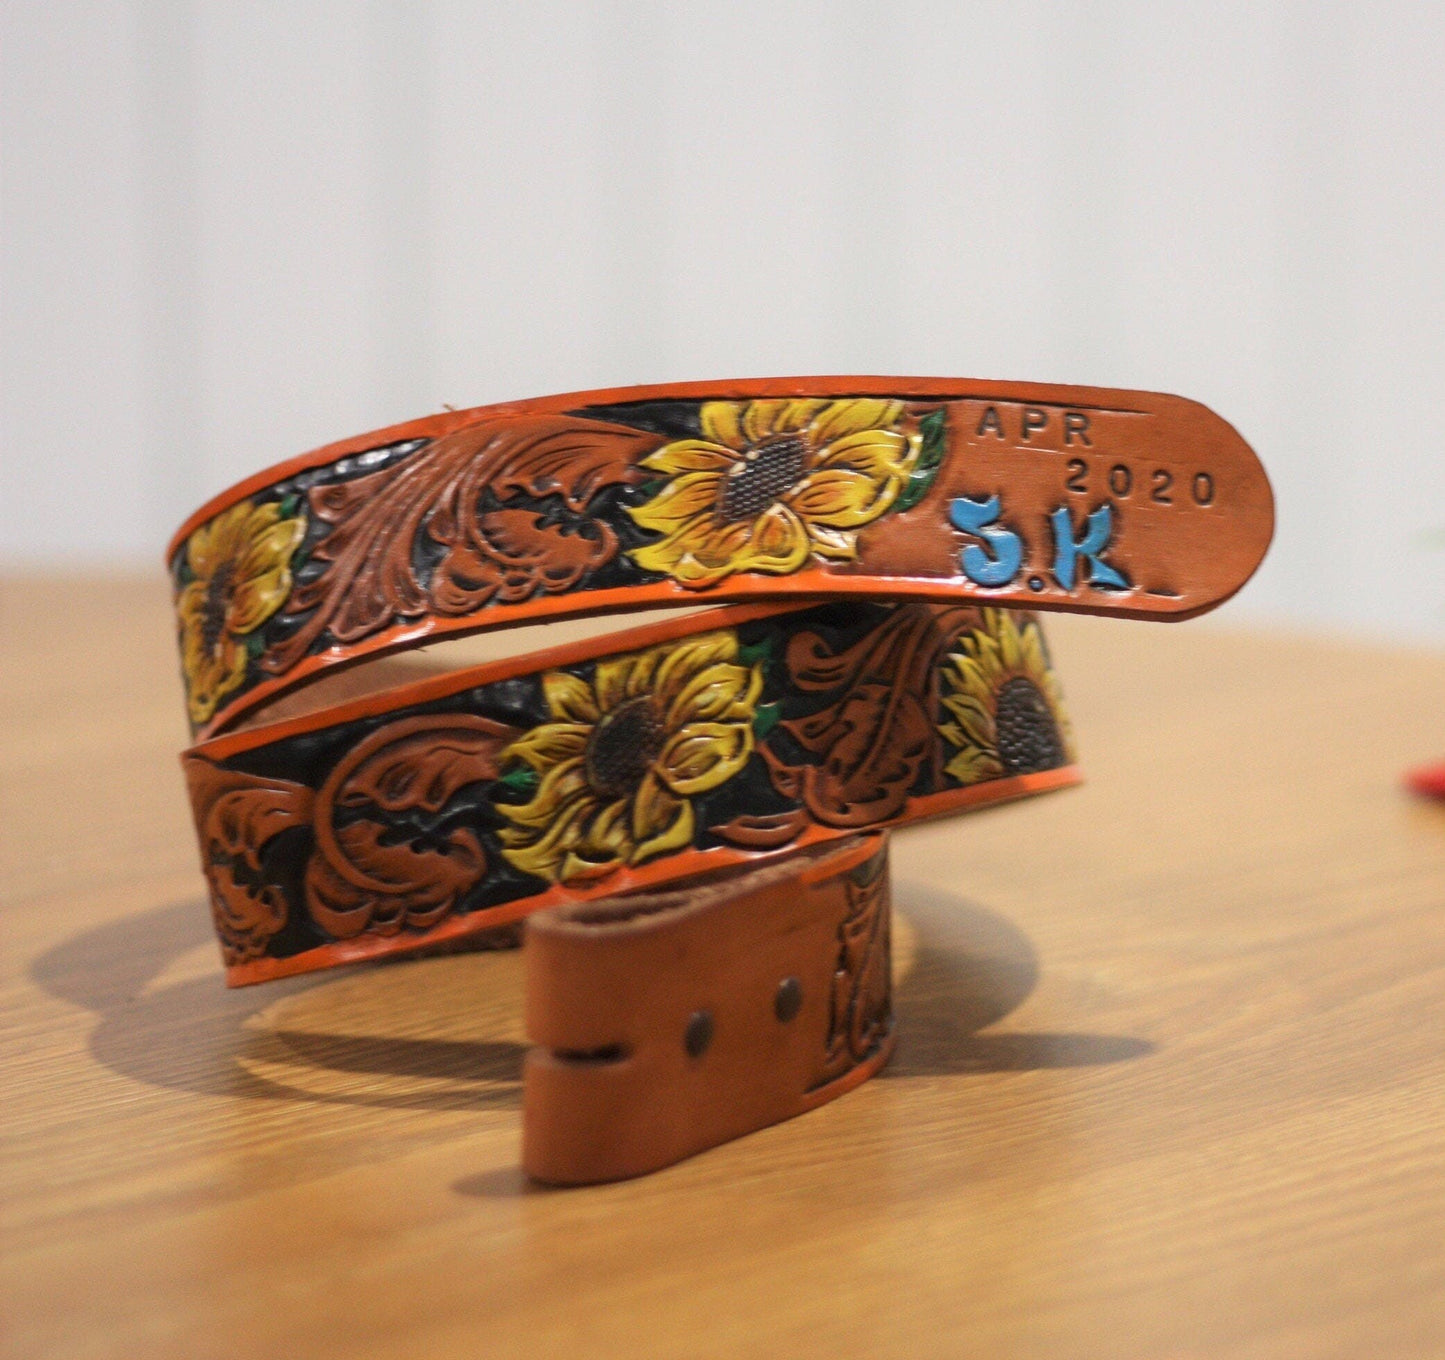 Hand tooled leather belt by The Sho Room - Hand painted sunflower